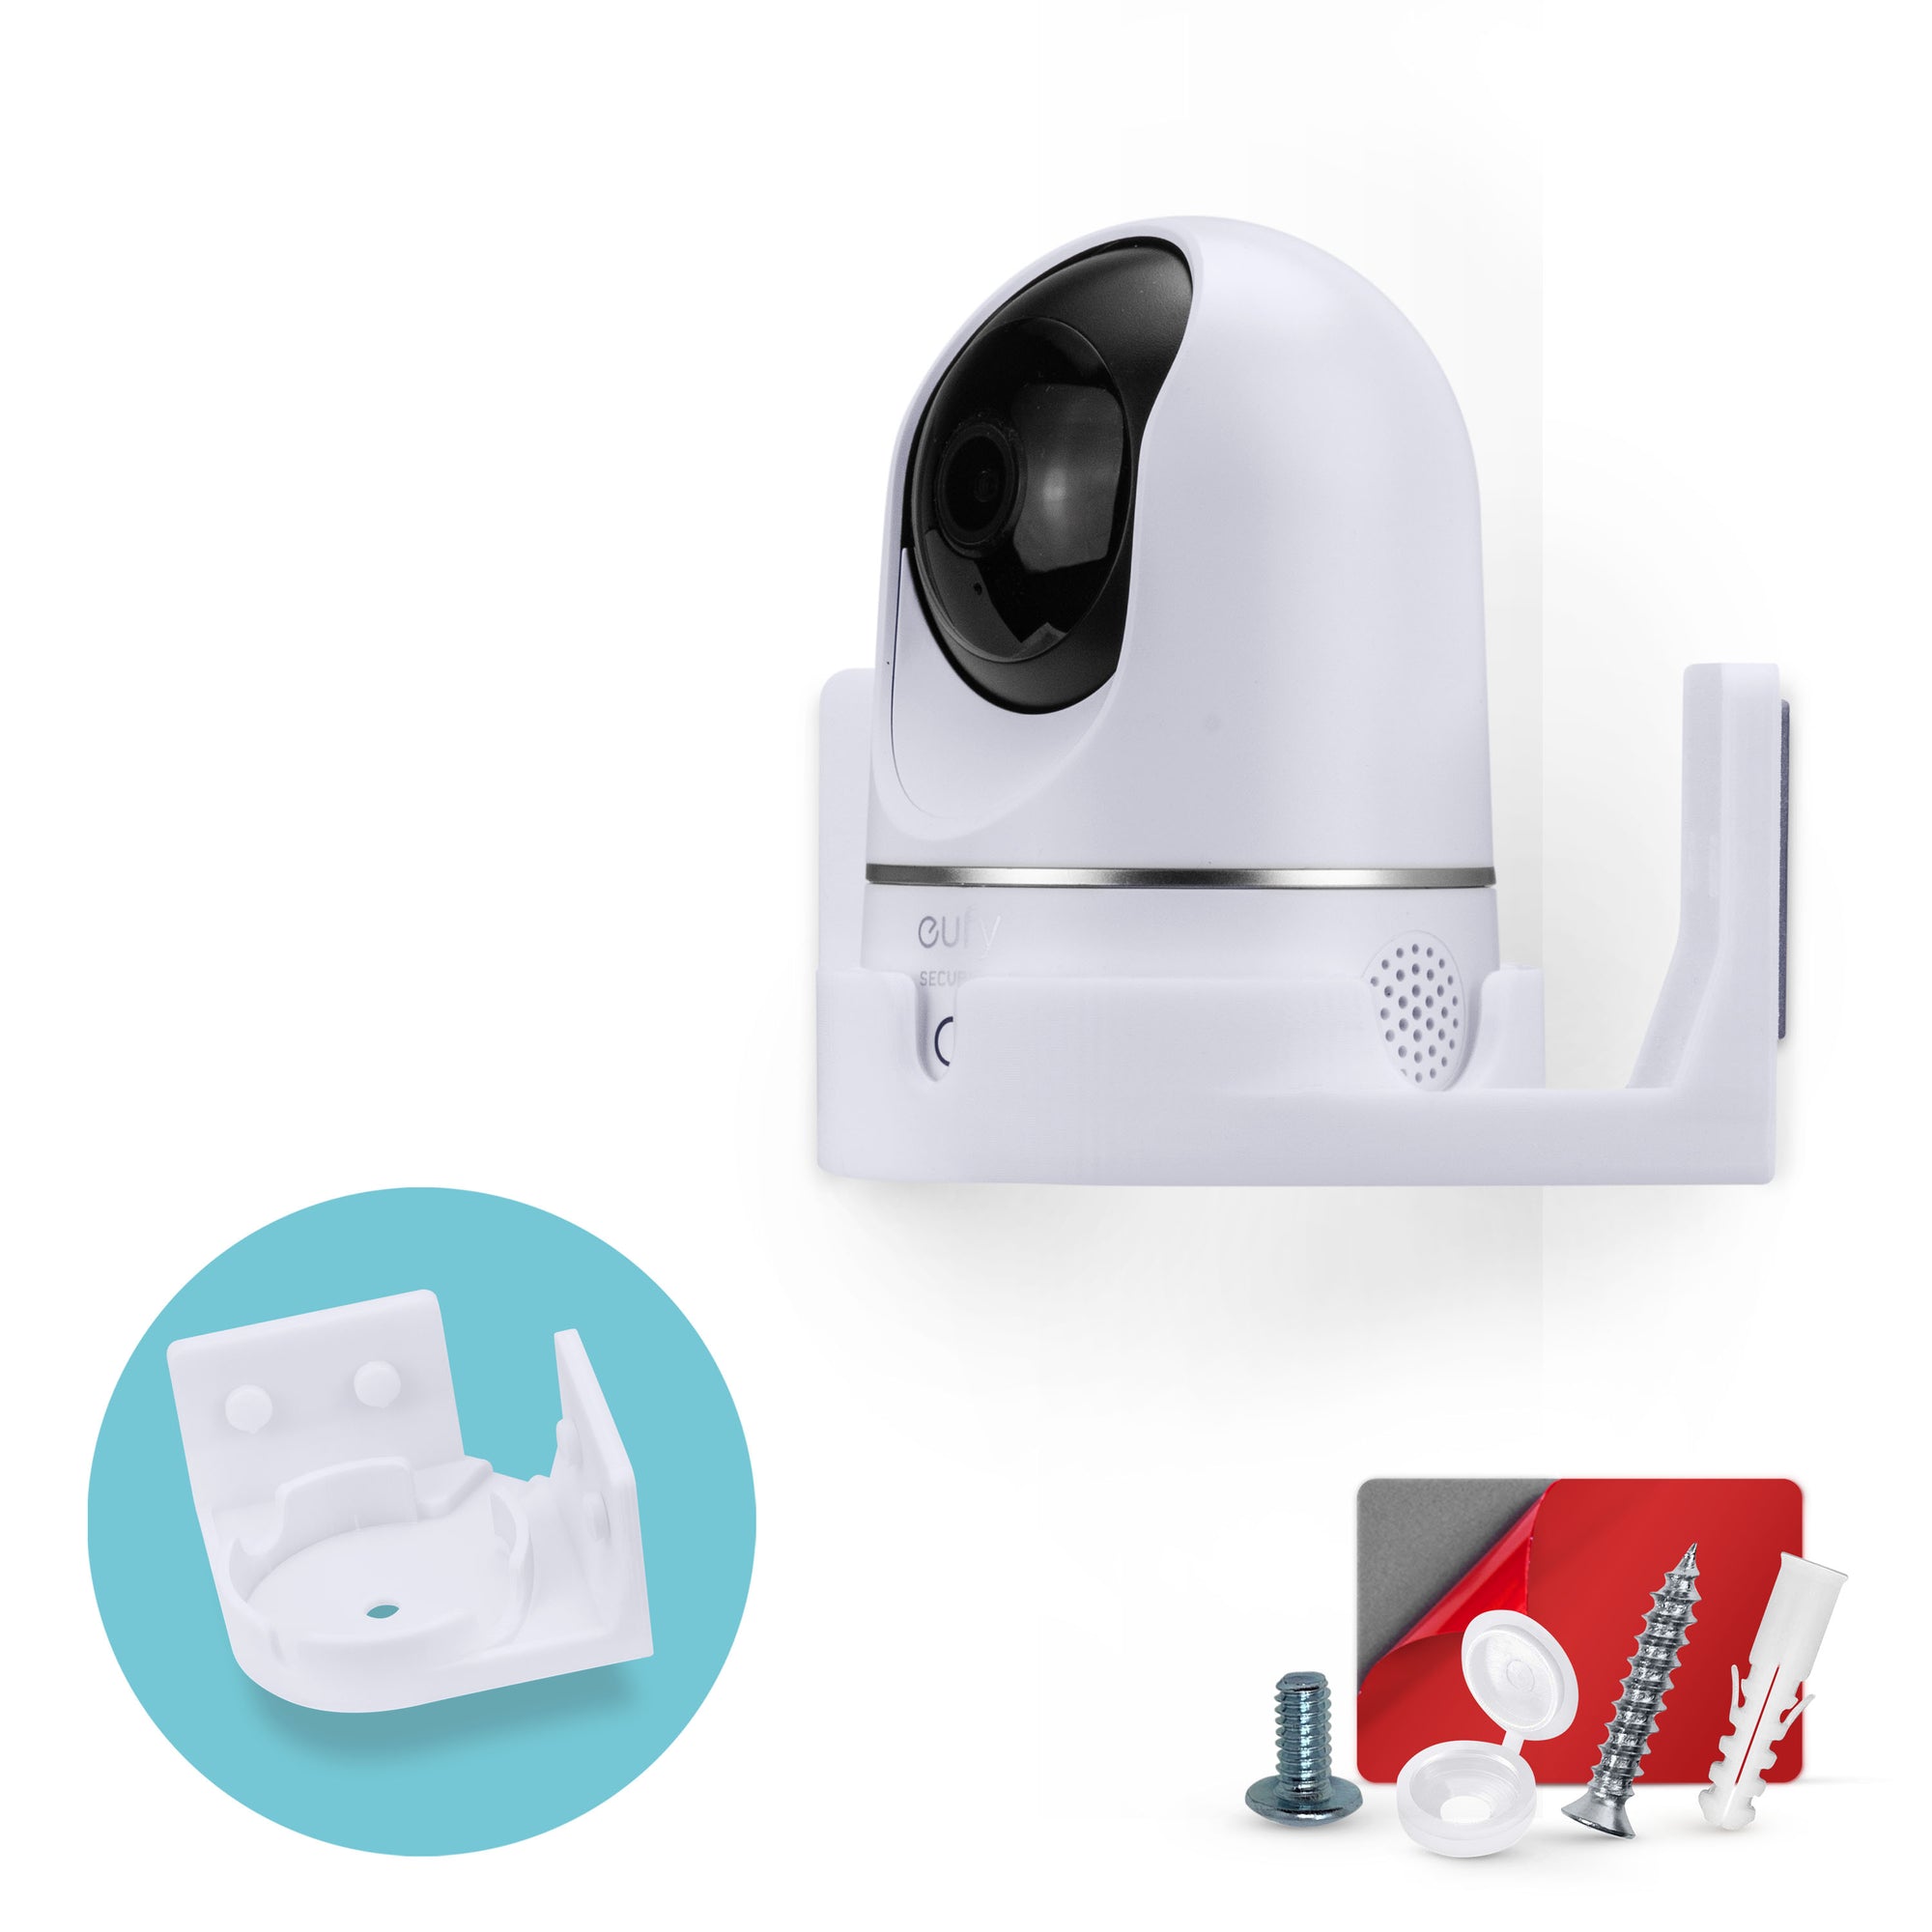 Corner Wall Mount Eufy T8410X (IndoorCam E220 / S220),  Adhesive Security Camera Holder Bracket, Reduce Blind Spots & Clutter, Adhesive & Screw-In Mounting